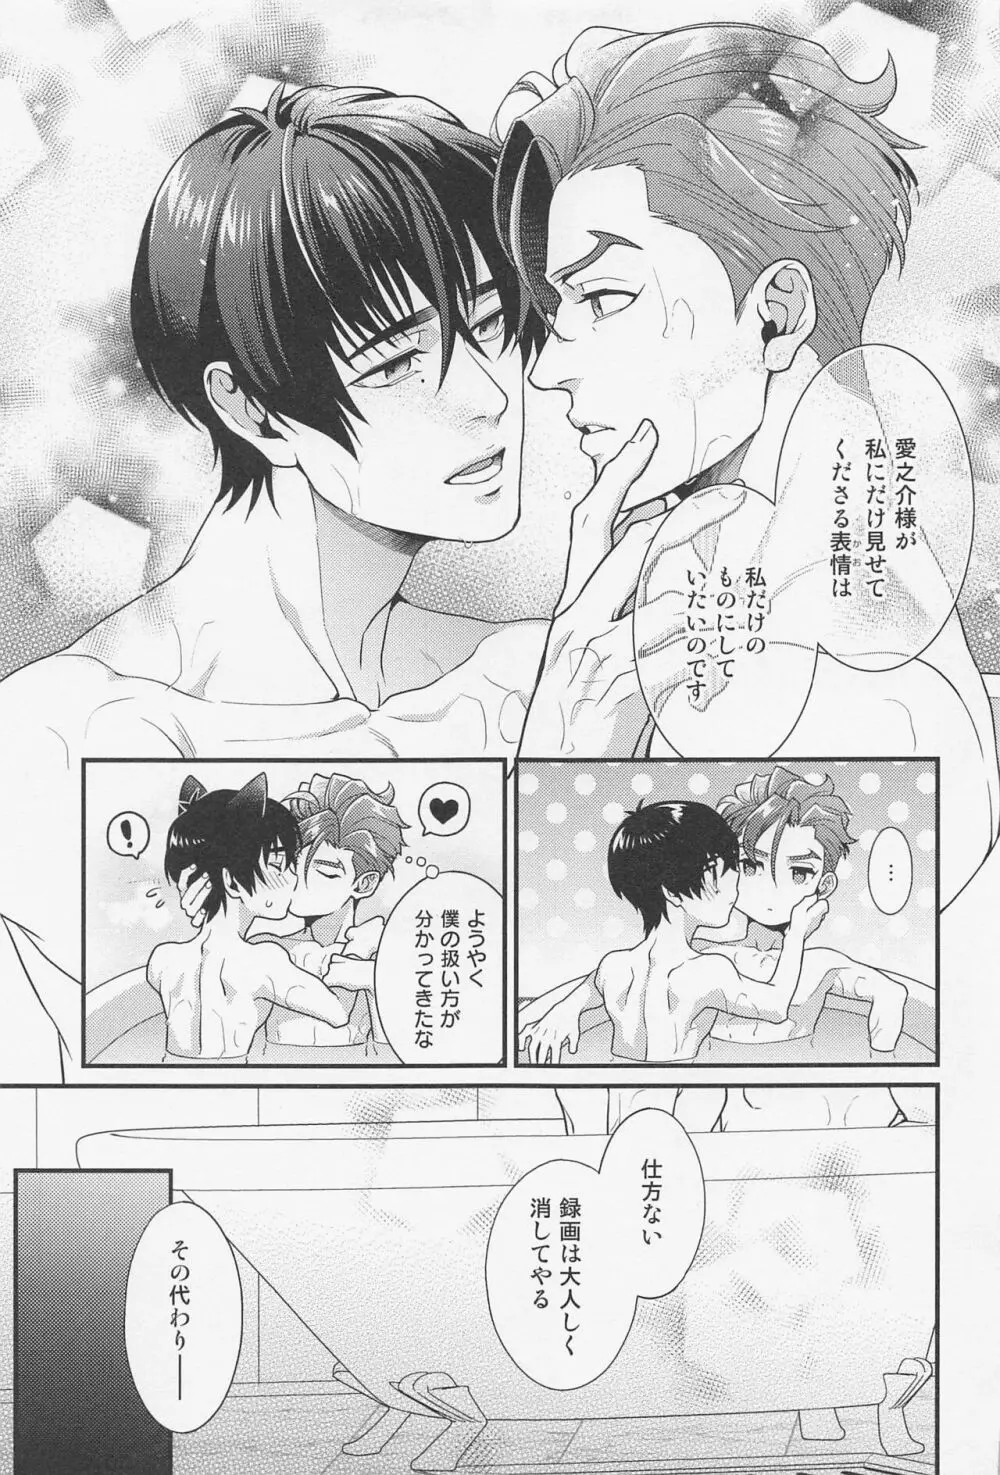 LOVE FIXED POINT - 愛の定点観測 Page.32